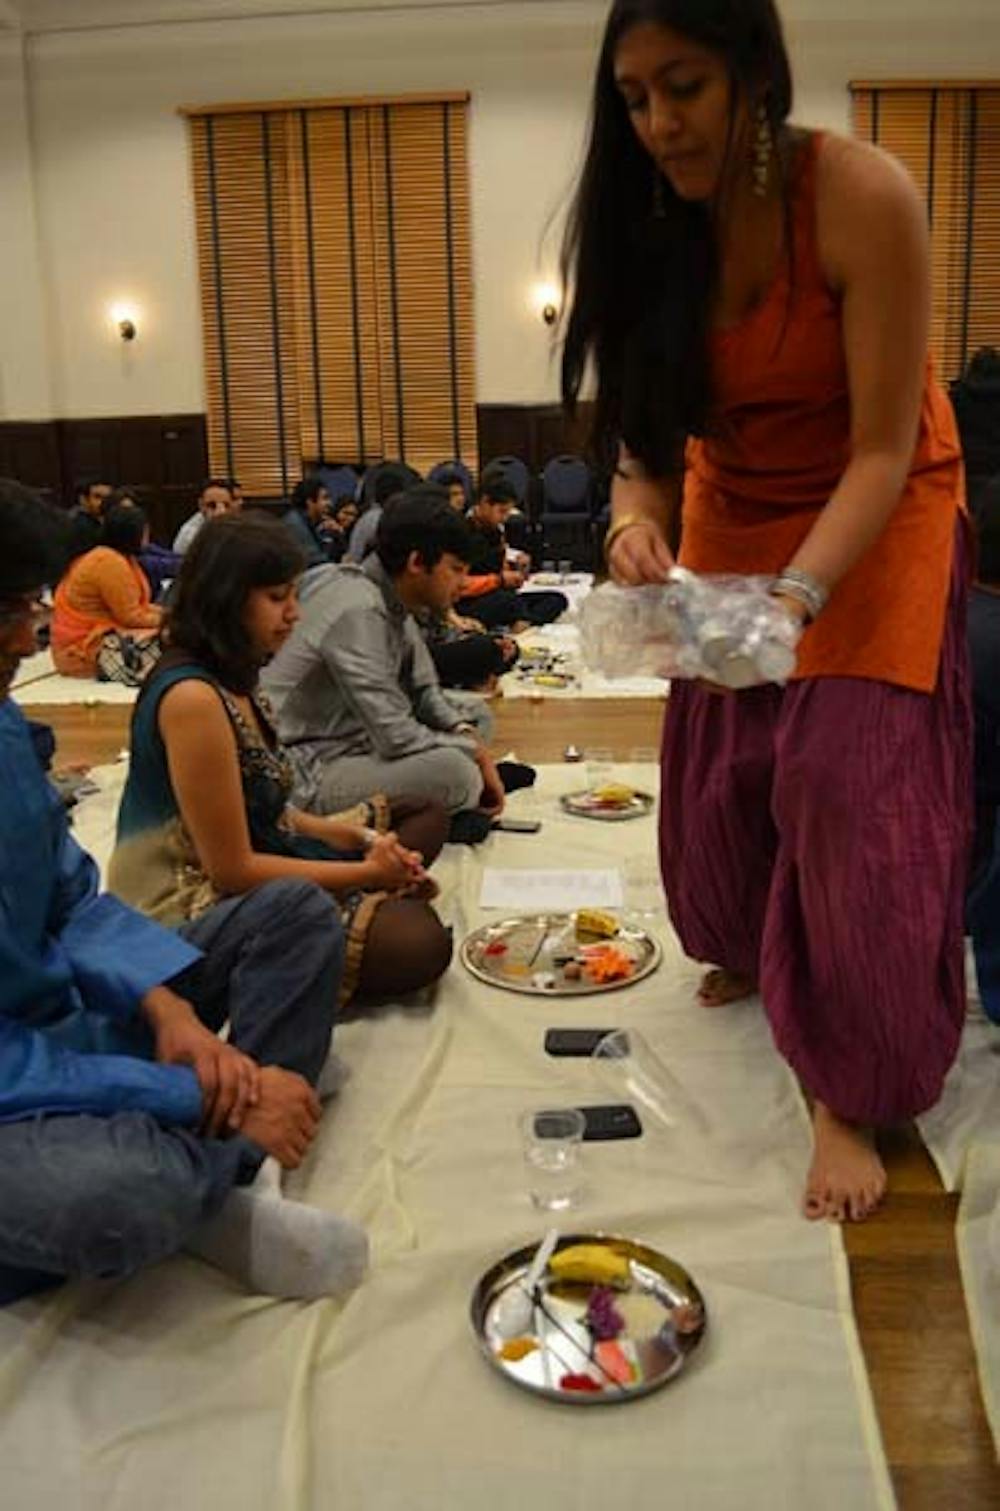 Penn Rangoli and Hindu Student Council partnered to host the annual *Diwali* celebration in Houston Hall. Students gathered perform puja to celebrate the festival of light and welcome in the new year.   